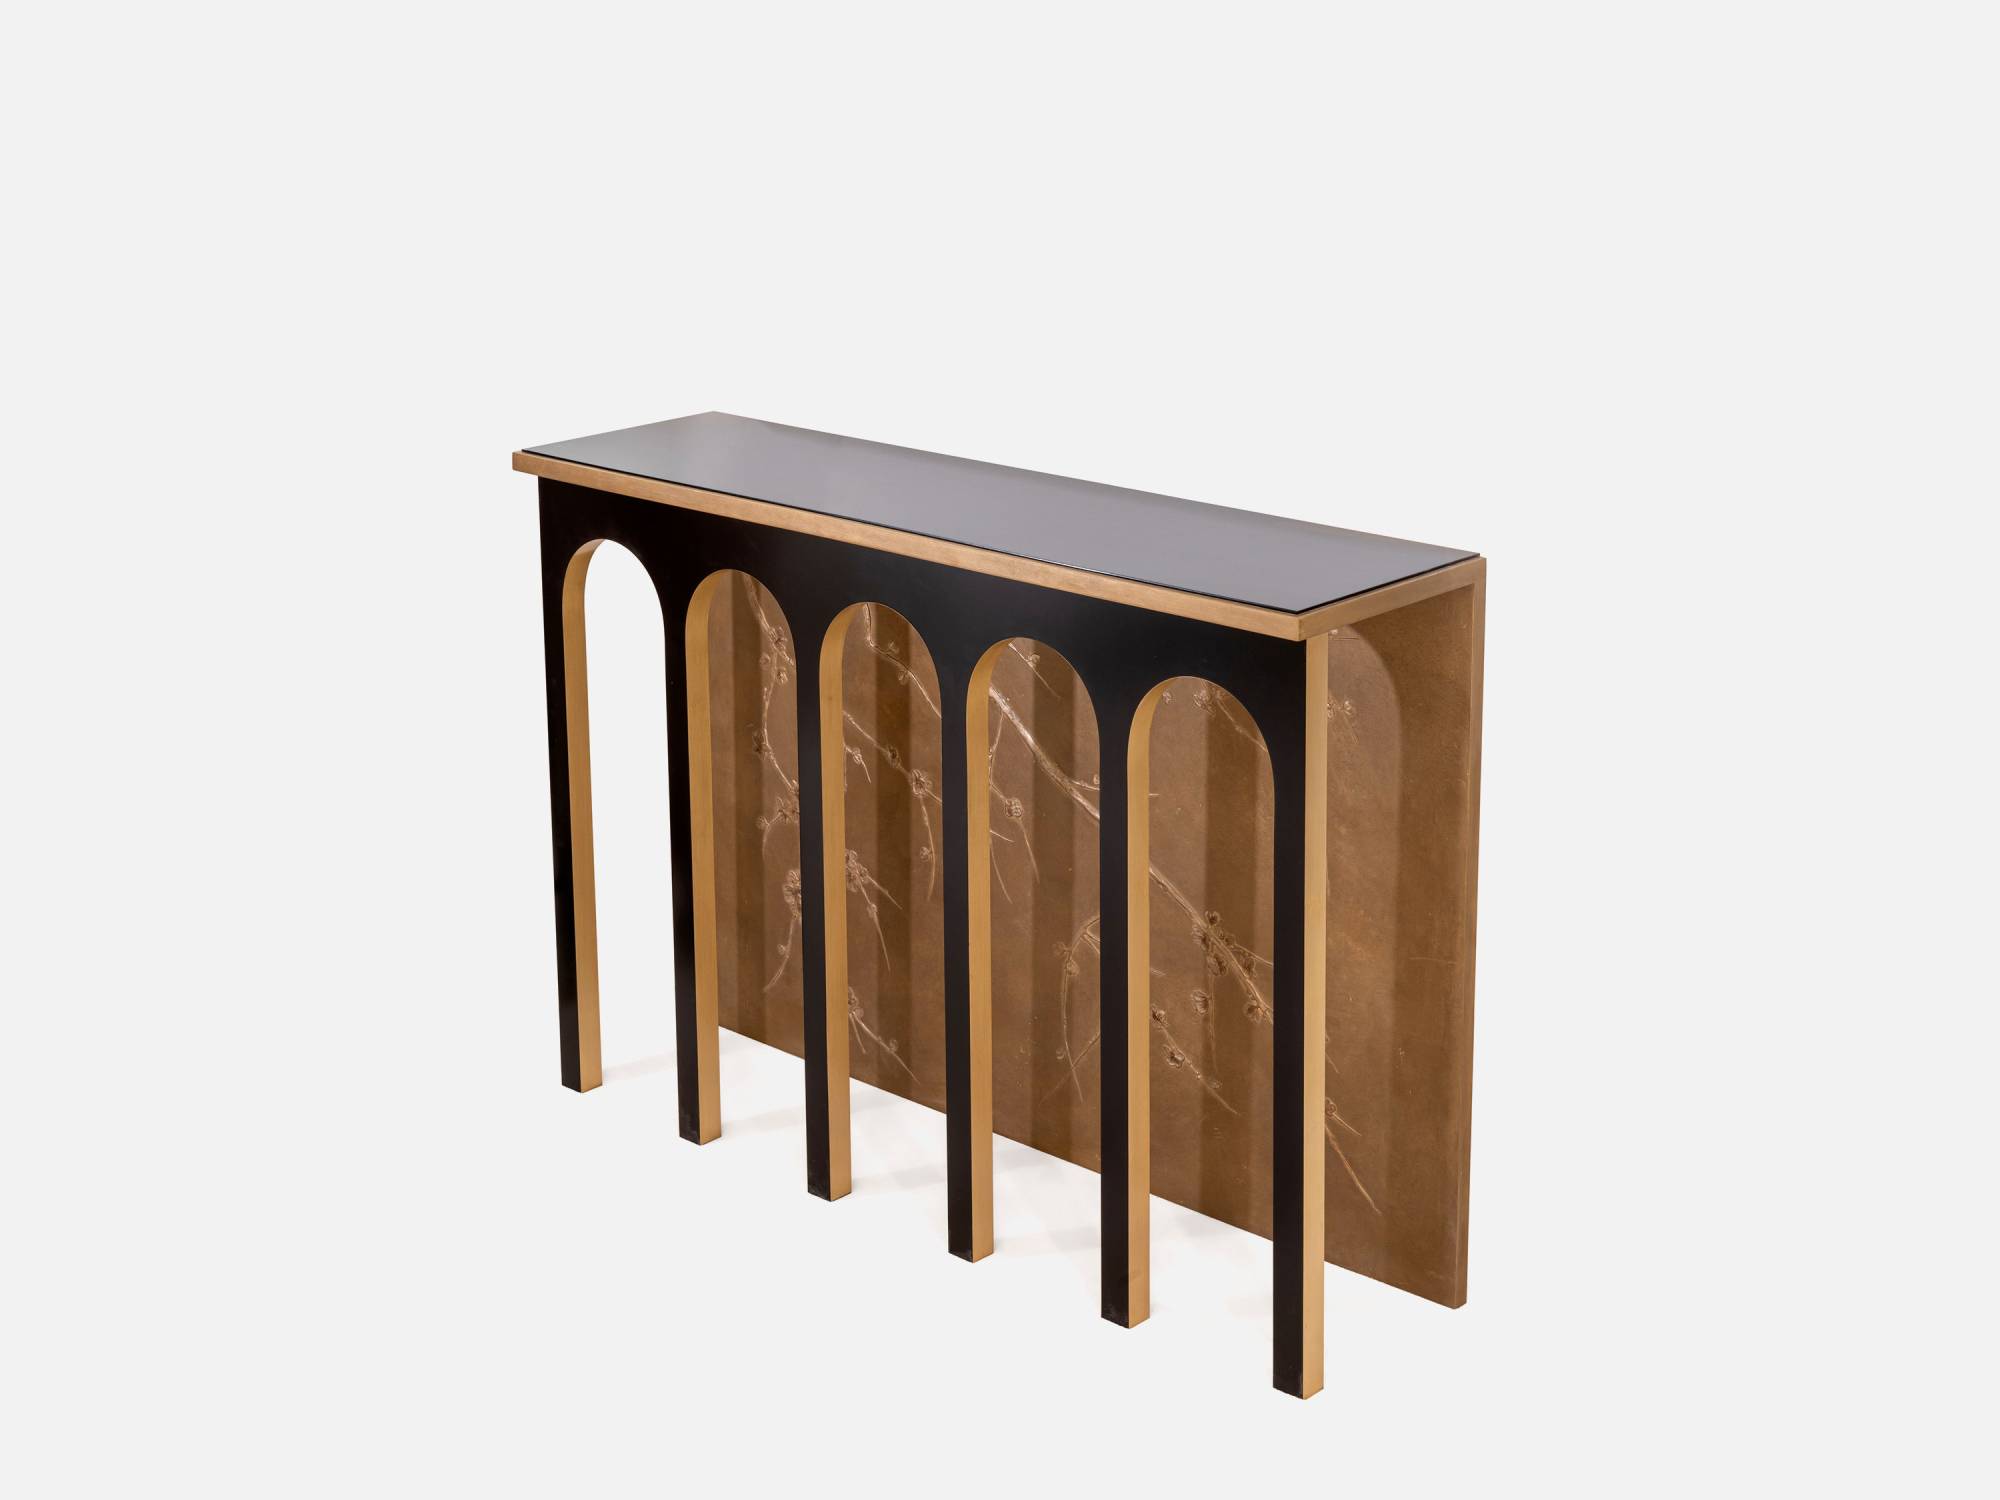 ART. 2293 - C.G. Capelletti quality furniture with made in Italy contemporary Console